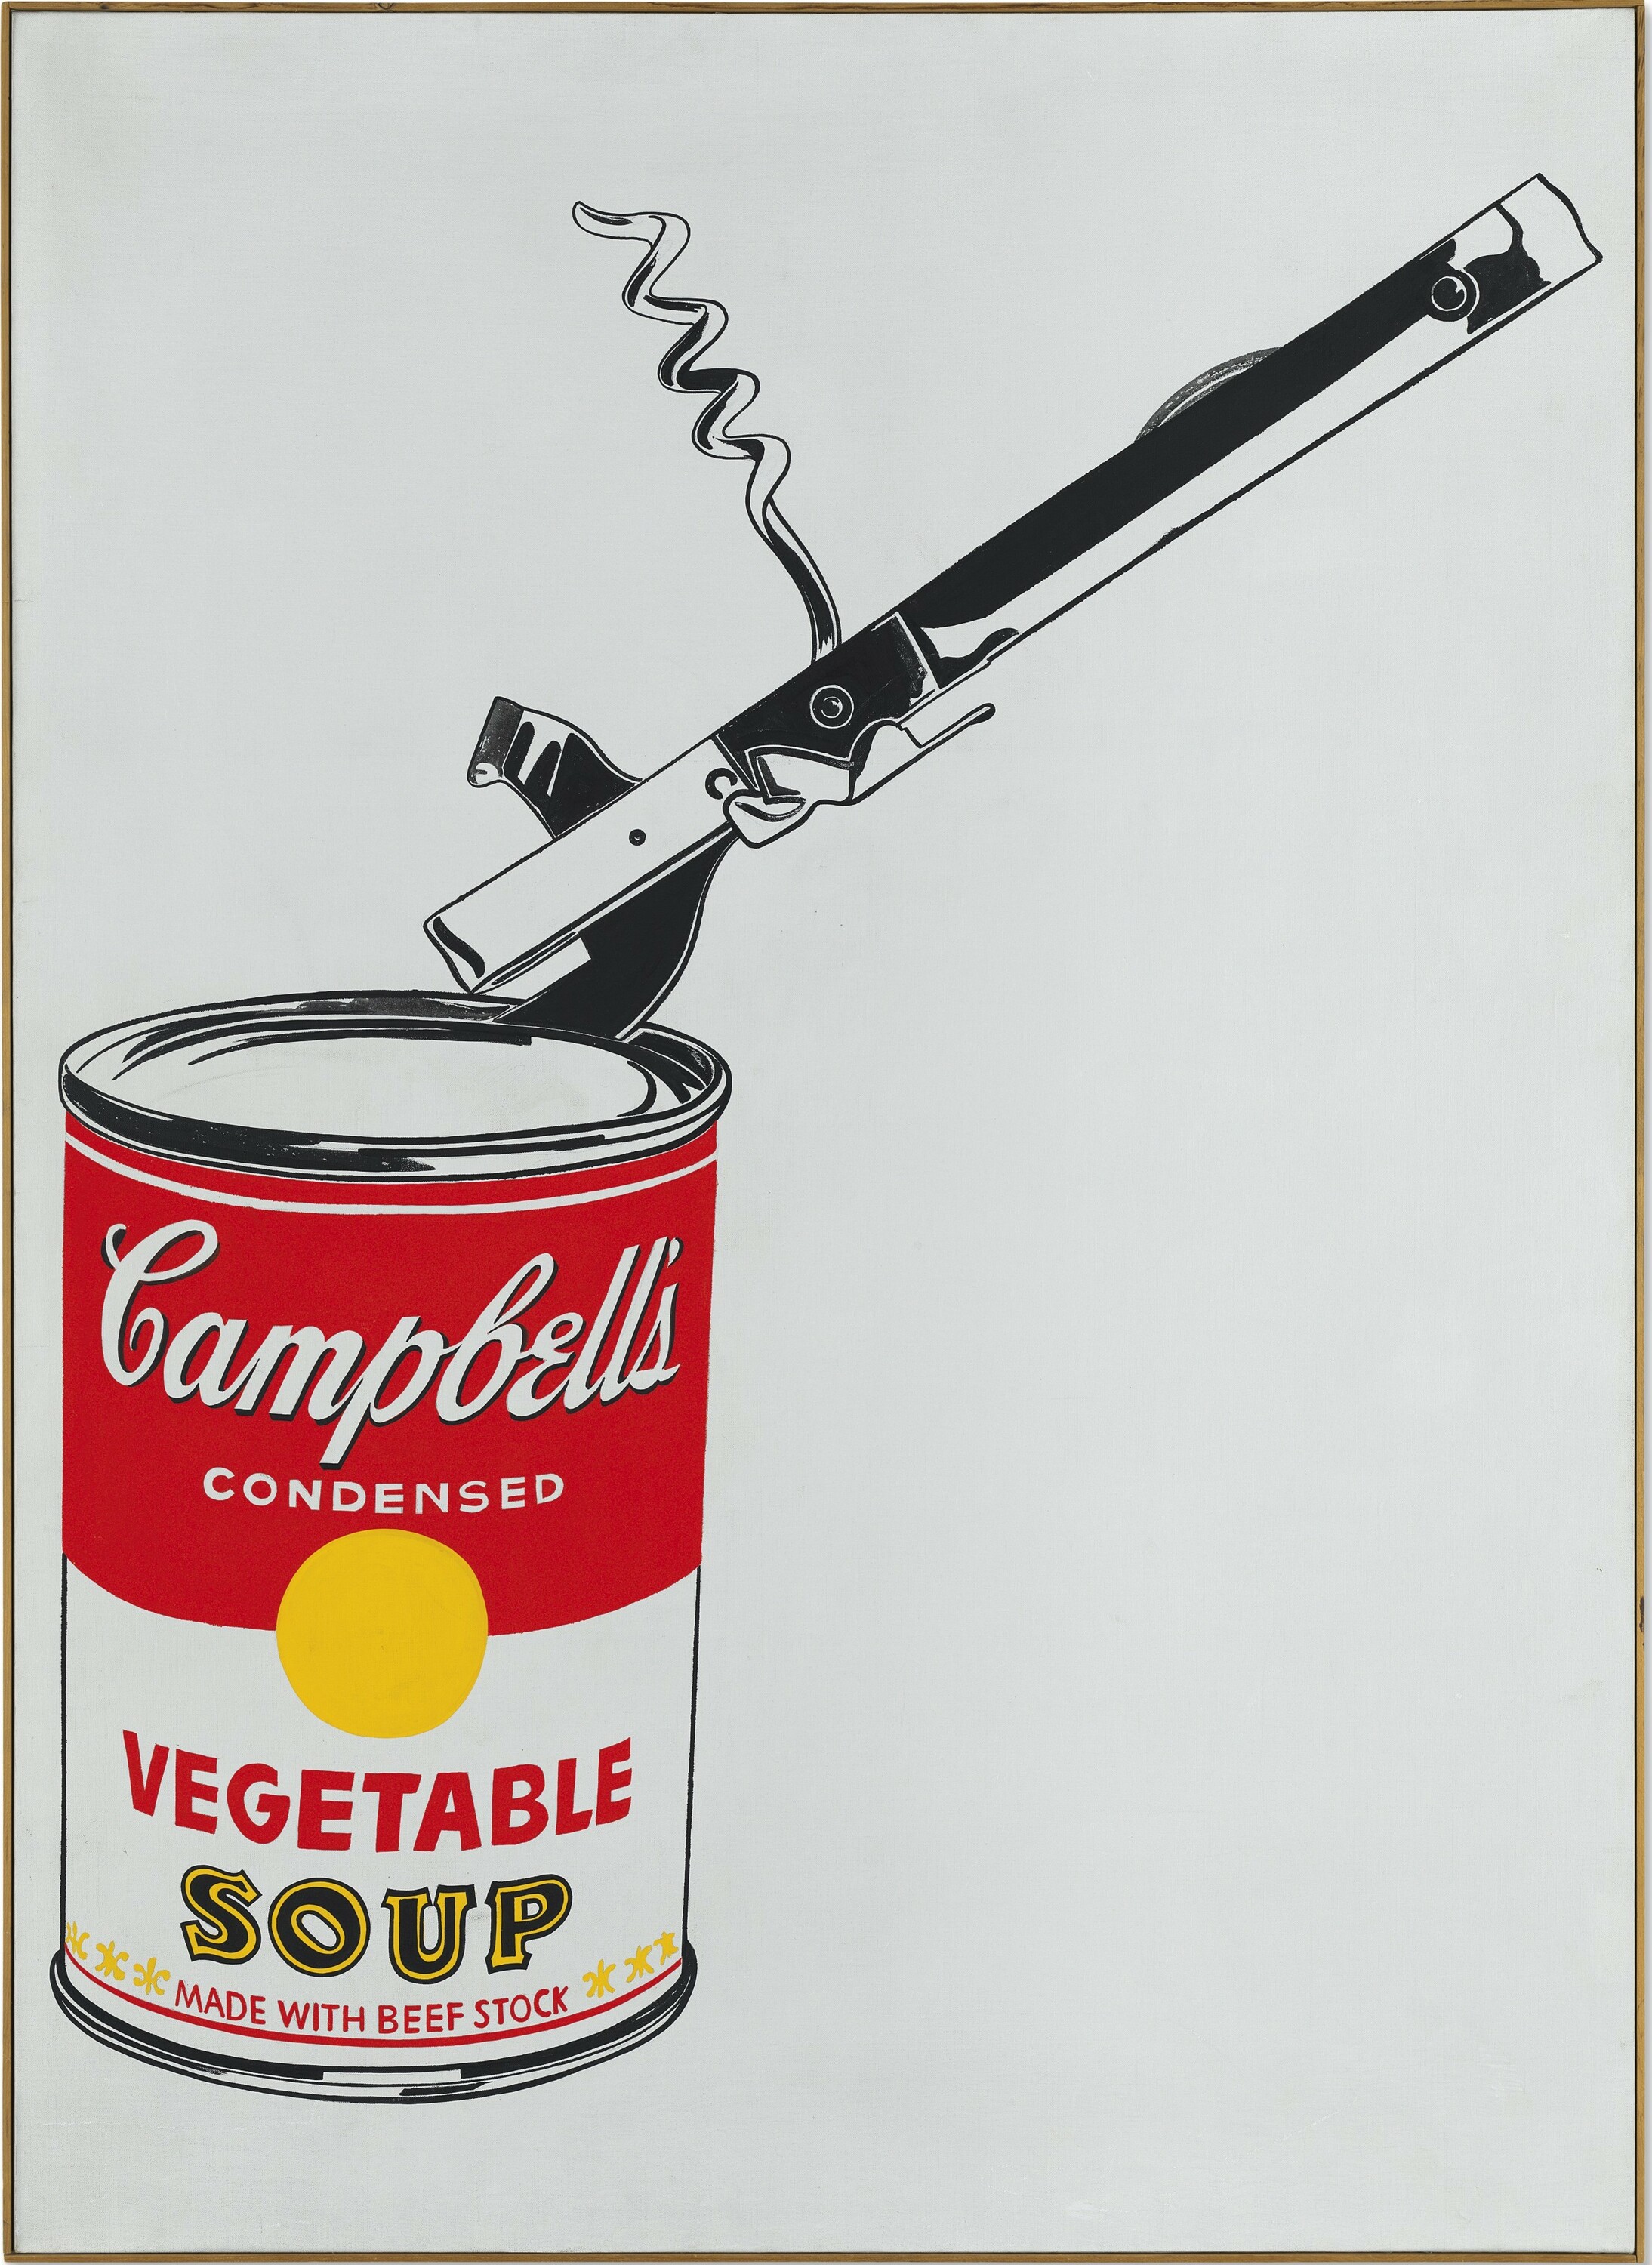 Andy Warhol's Campbell's Soup can.